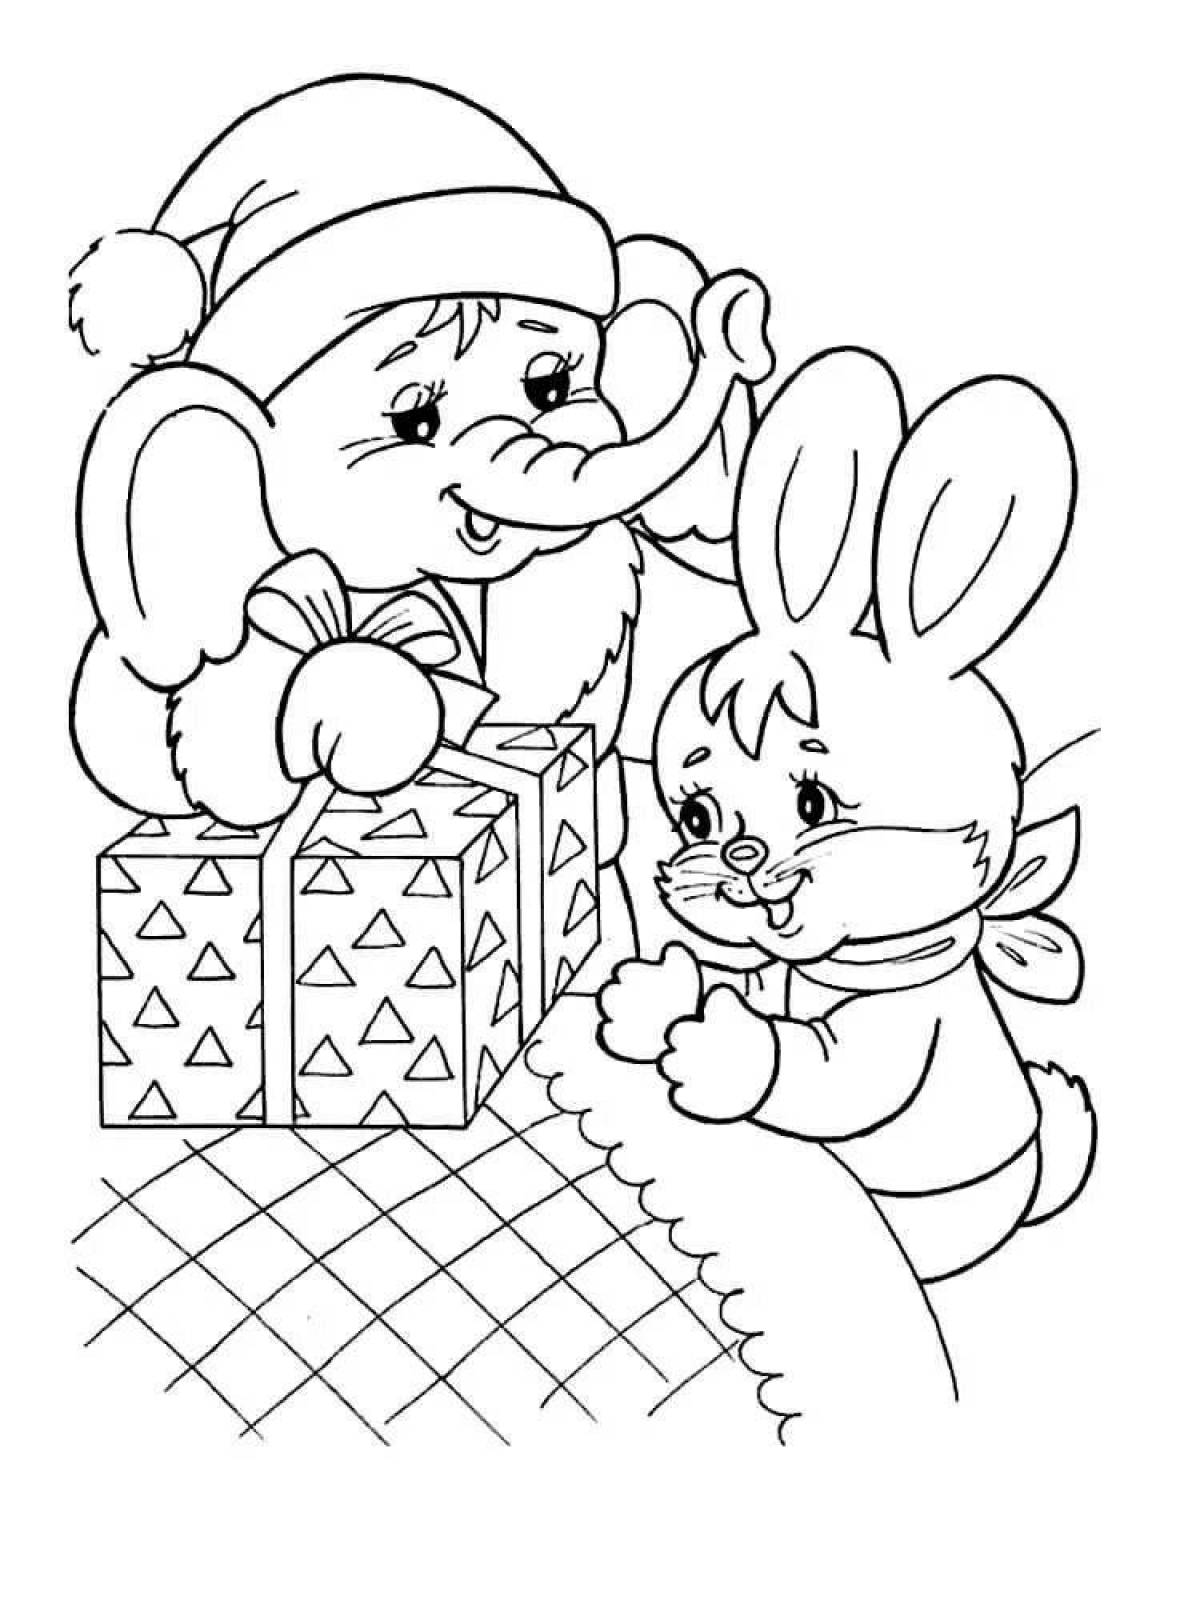 Happy coloring hare 2023 new year